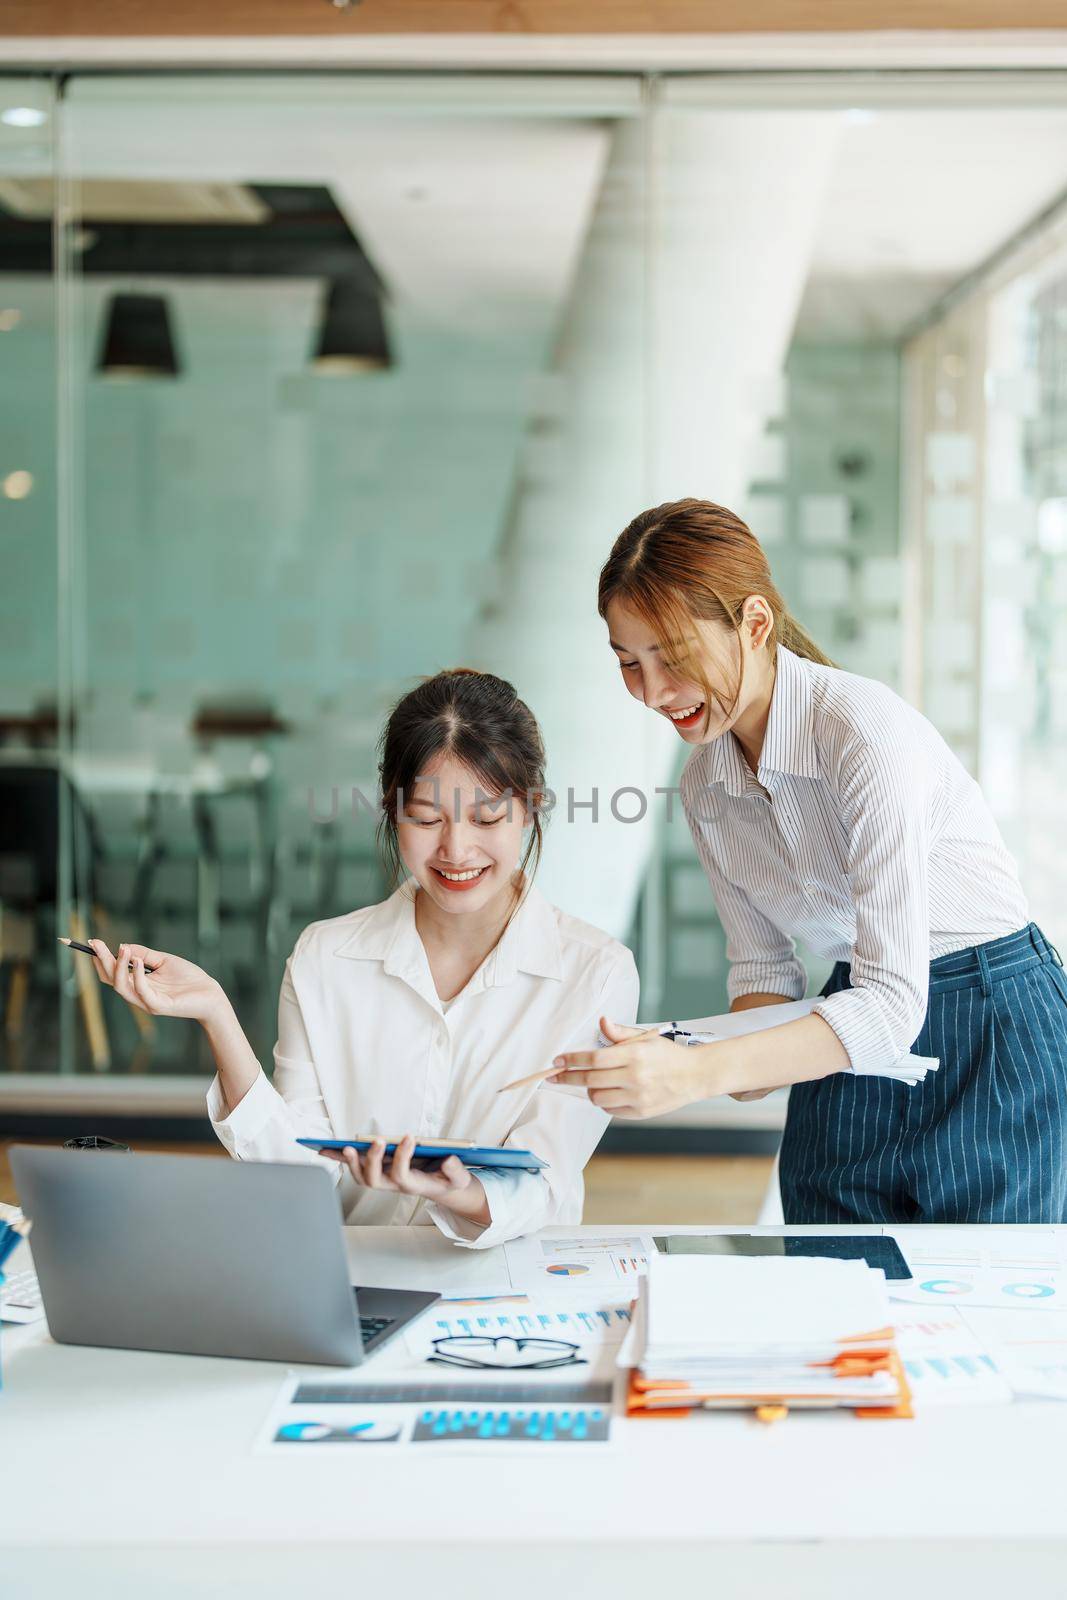 Negotiation, Analysis, Discussion: Portrait of an Asian woman economist and marketer pointing to a financial data sheet to plan investments to prevent risks and losses for the company.